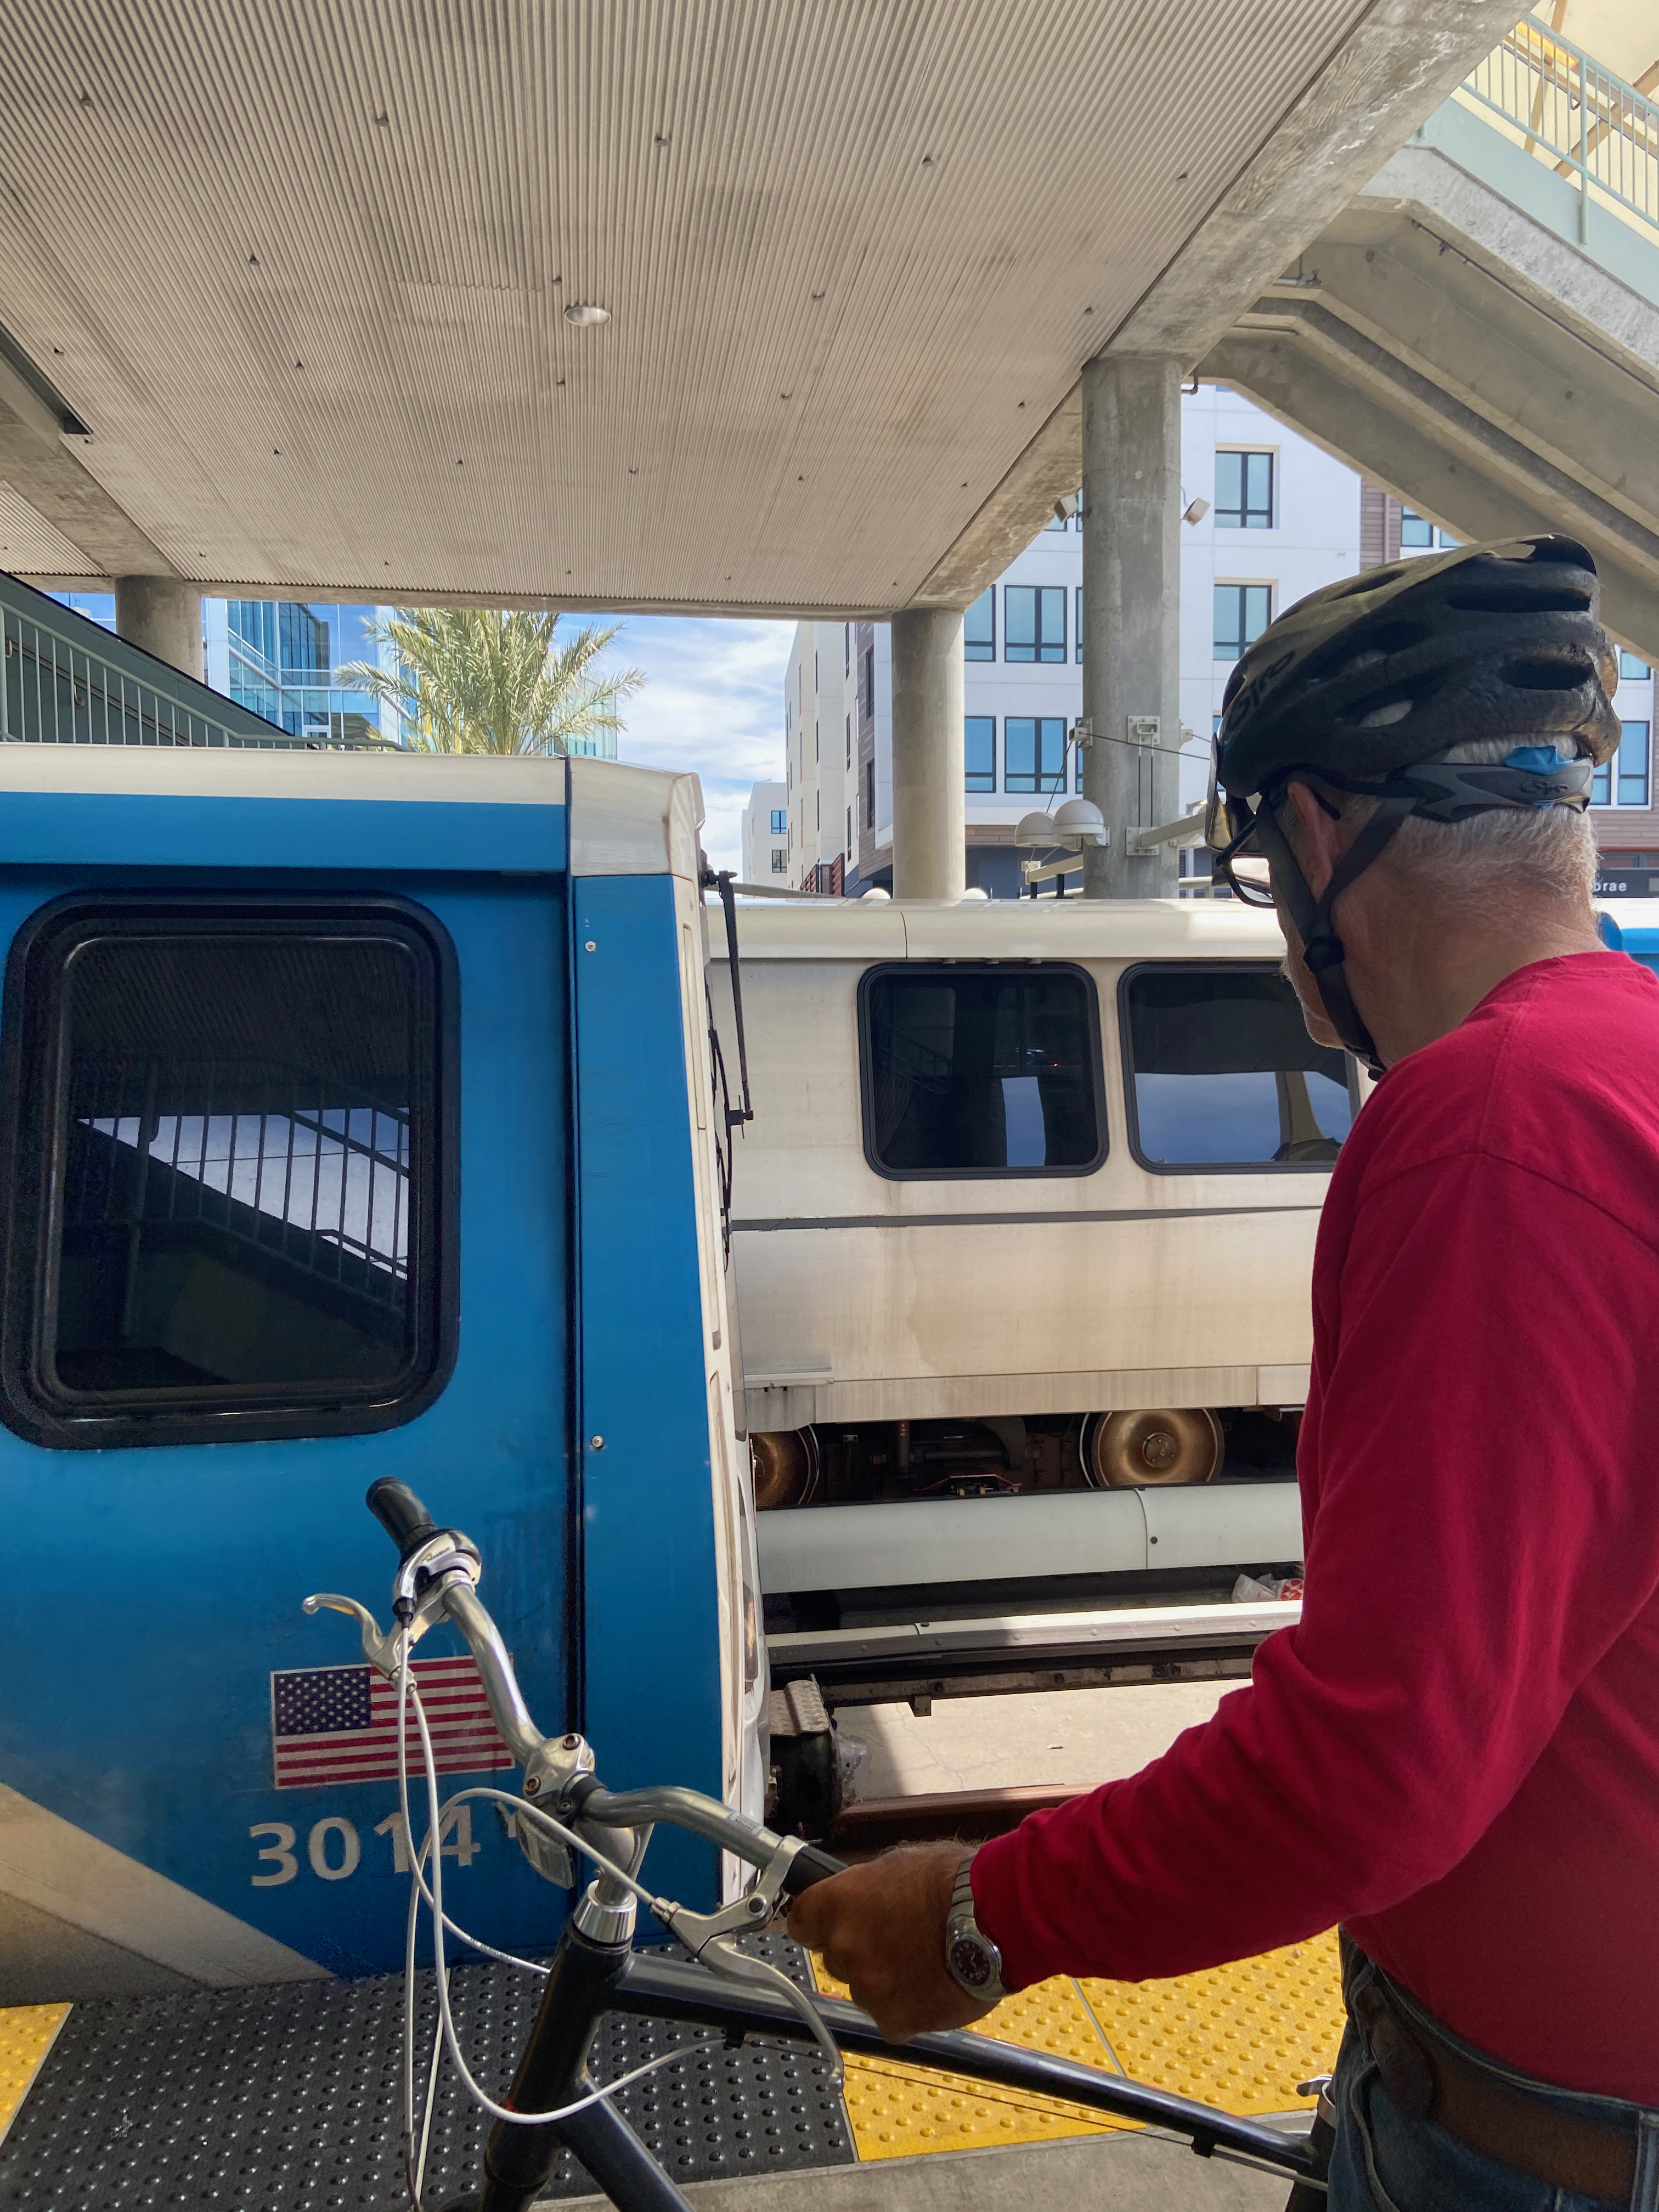 Mike with his bicycle inspecting the new BART cars as they arrive at Millbrae station